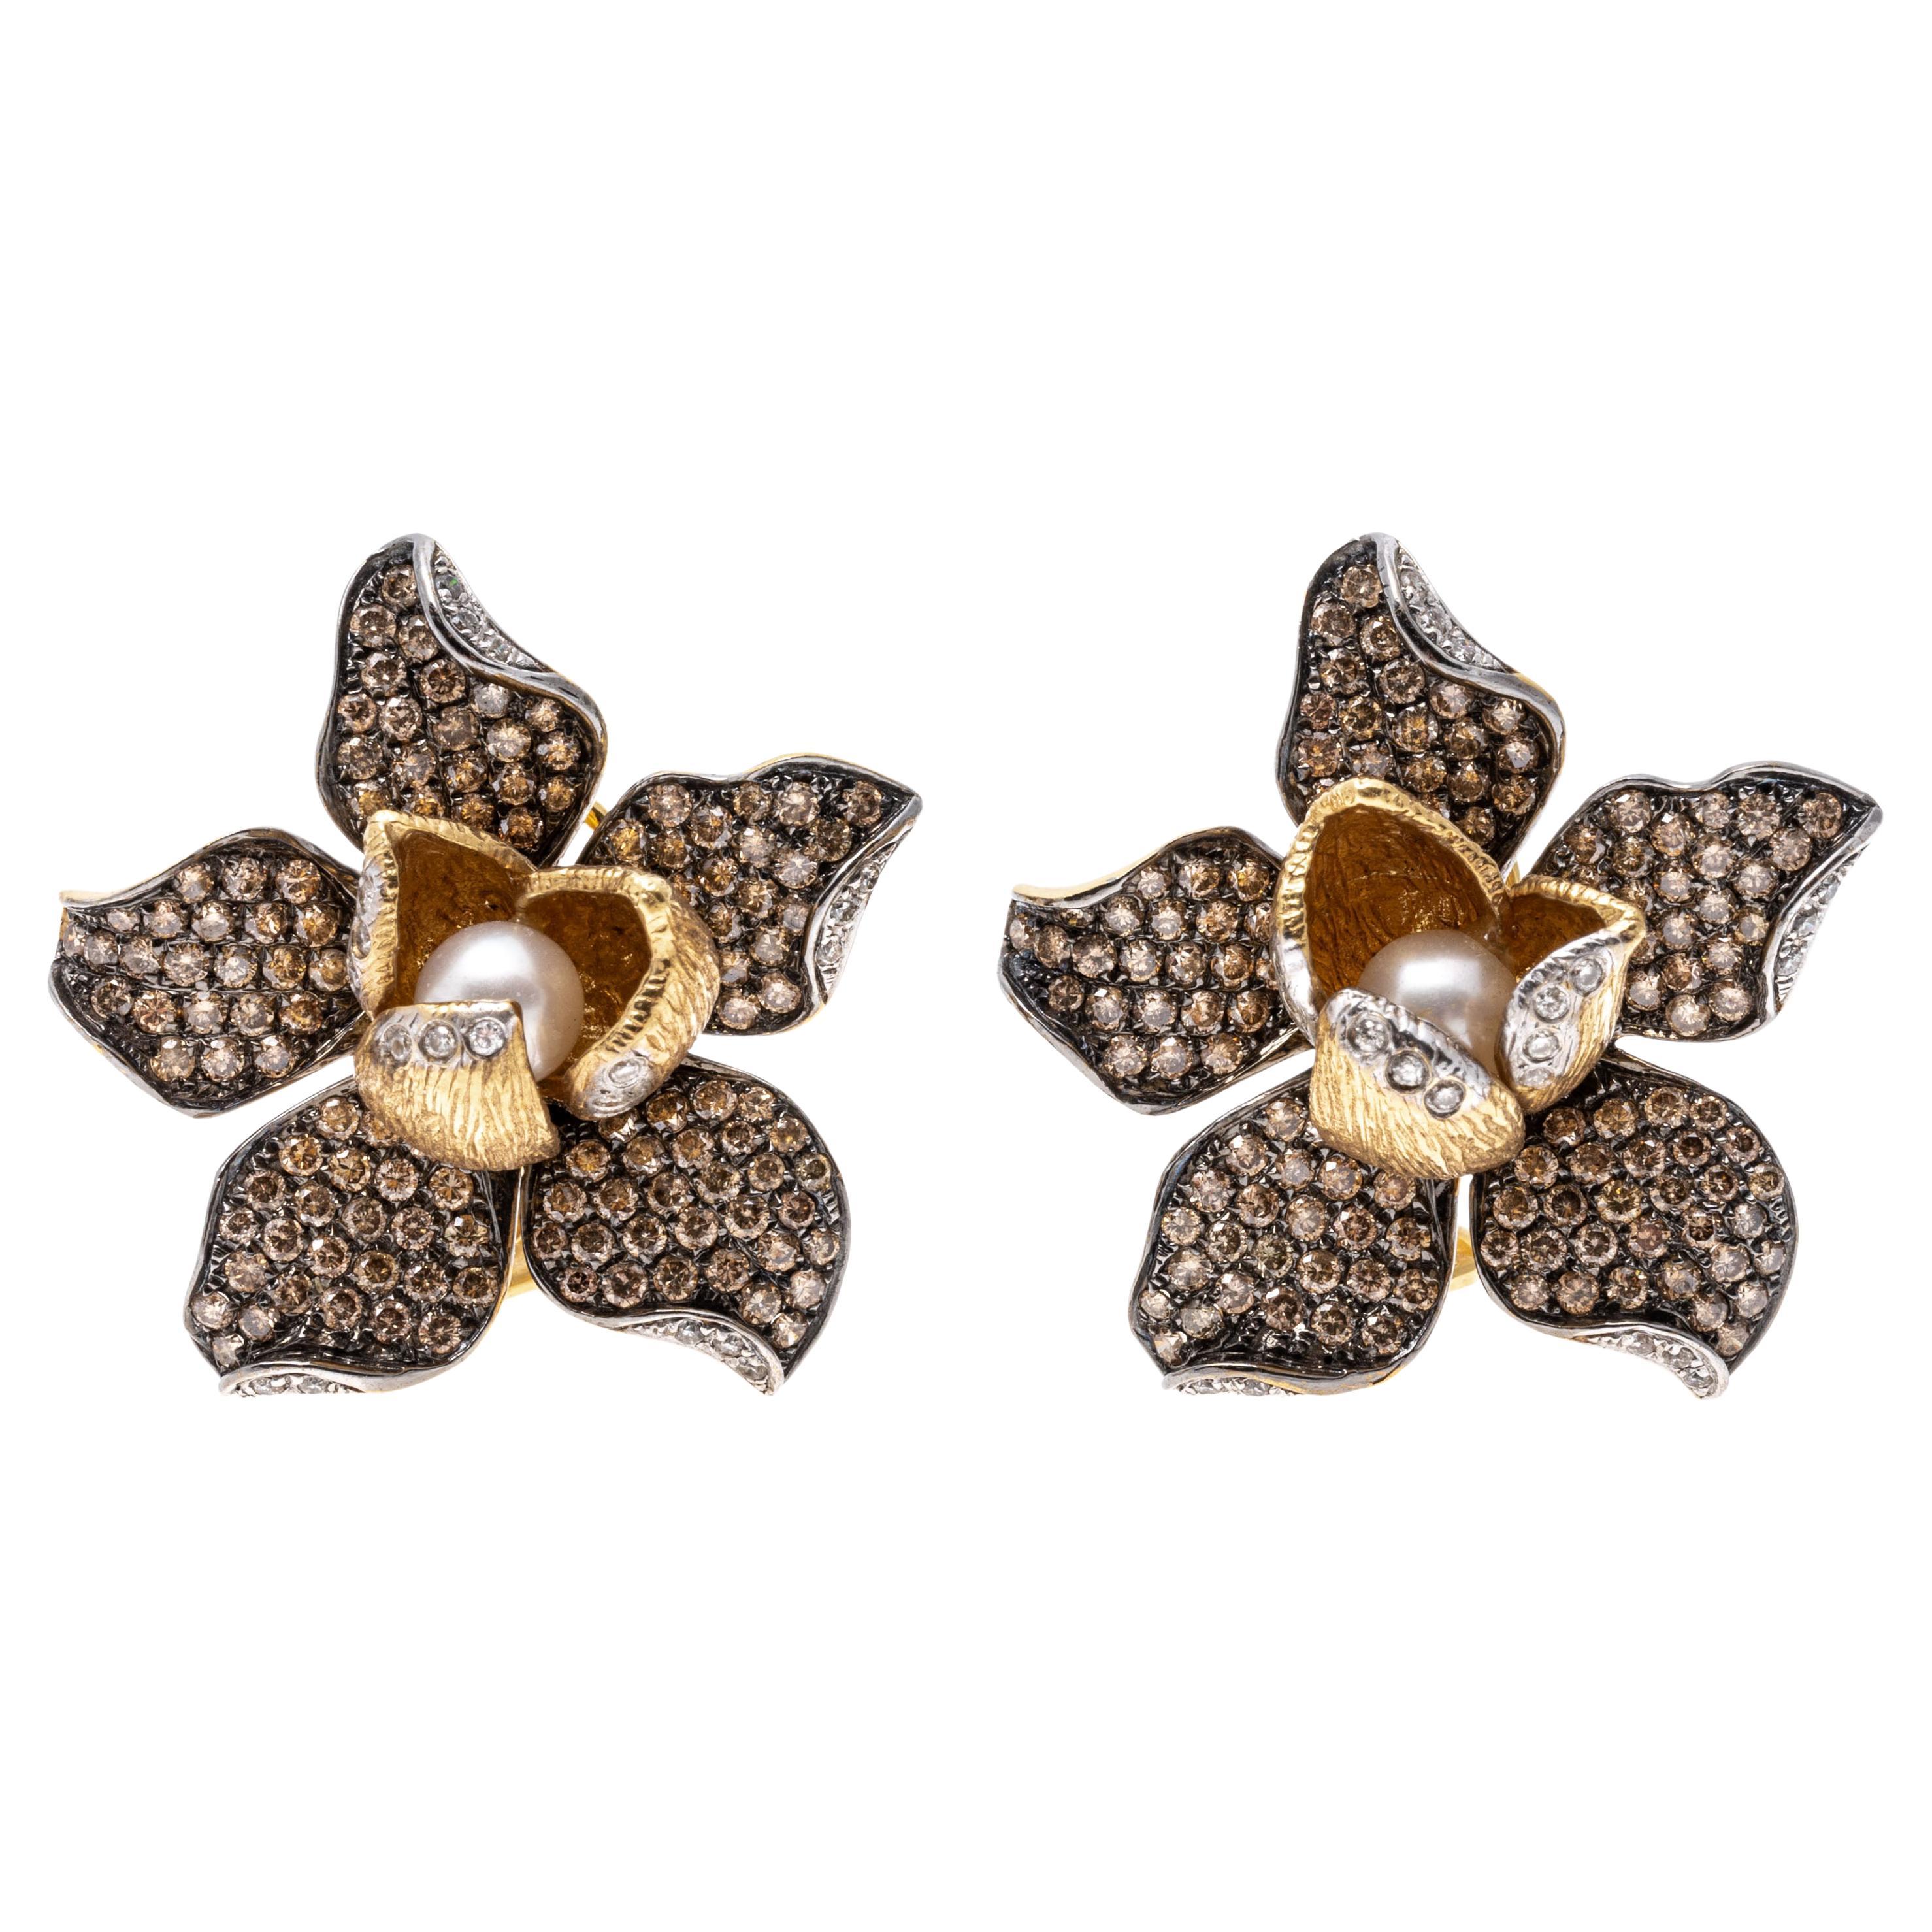 18K Yellow Gold Brown and White Pave Diamond (App. 2.8 TCW) and Pearl Earrings